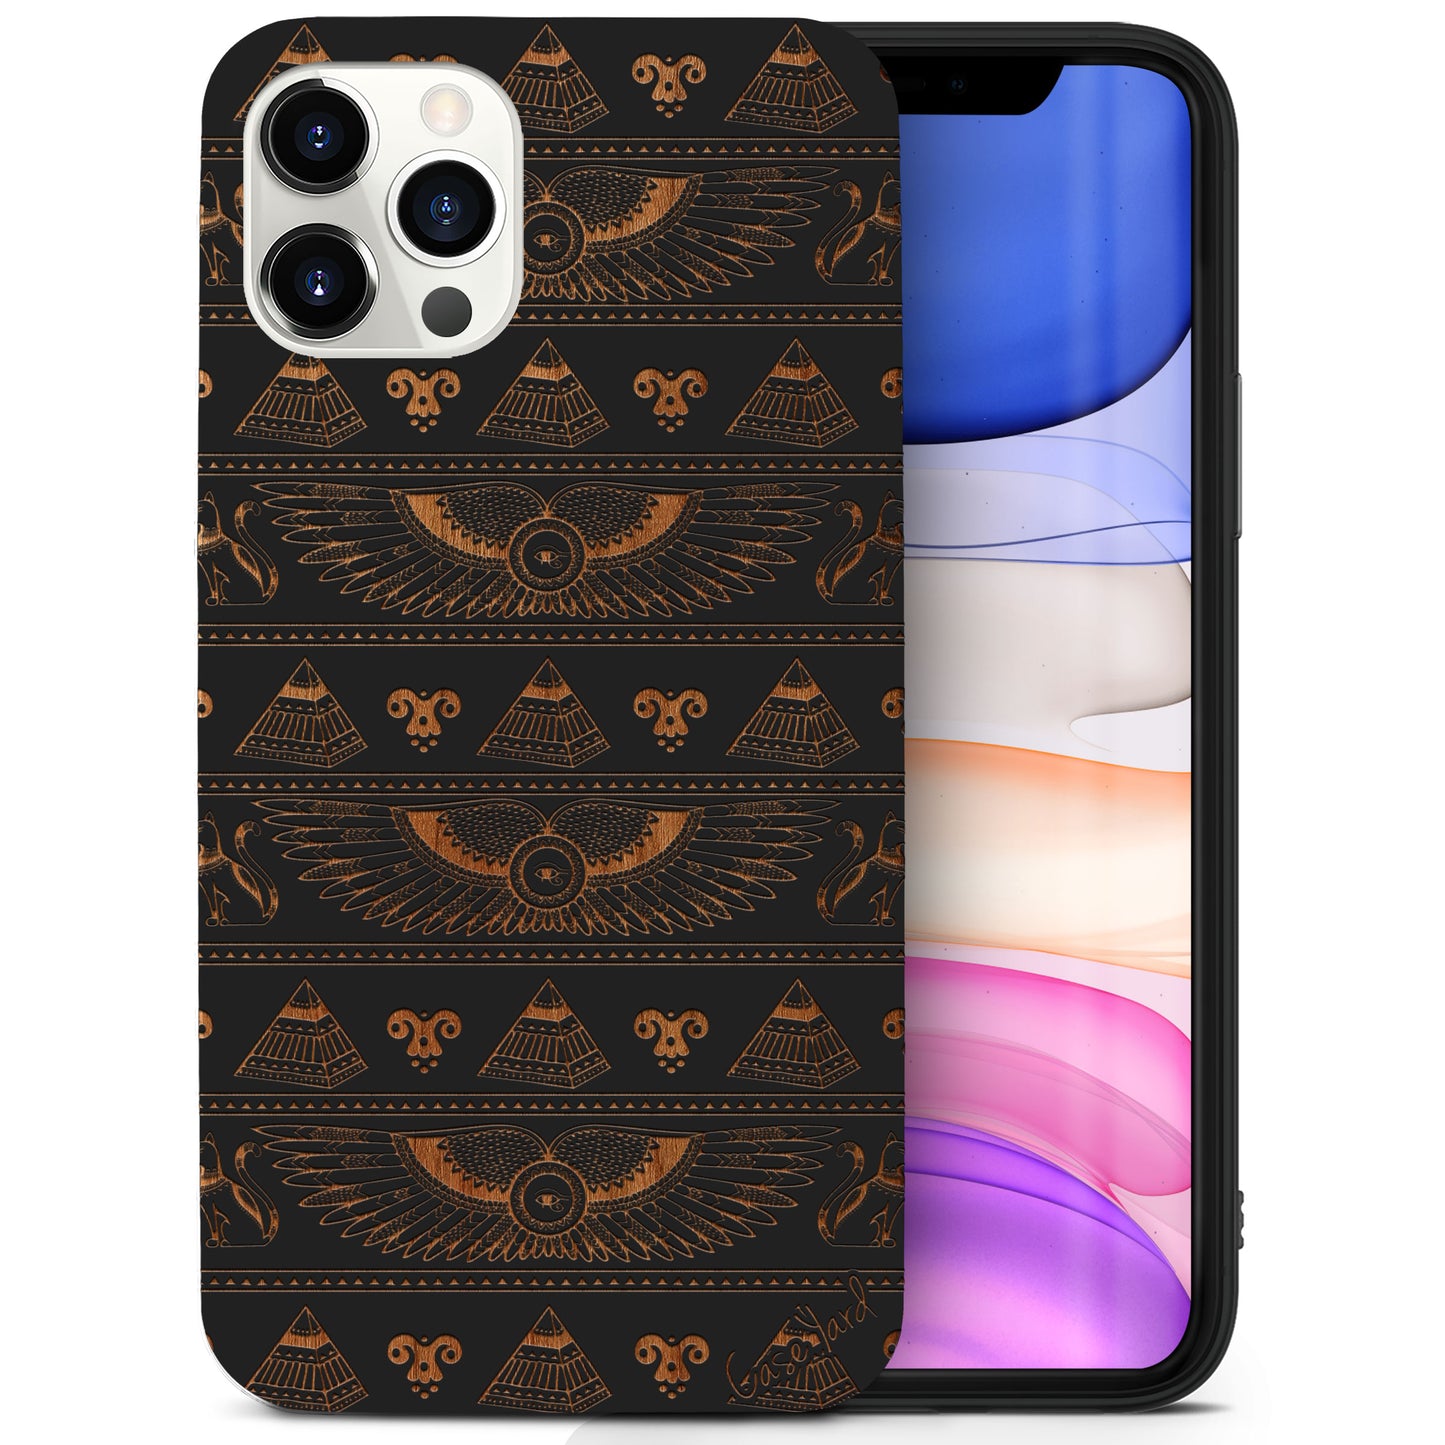 Wooden Cell Phone Case Cover, Laser Engraved case for iPhone & Samsung phone Pyramid Pattern Design